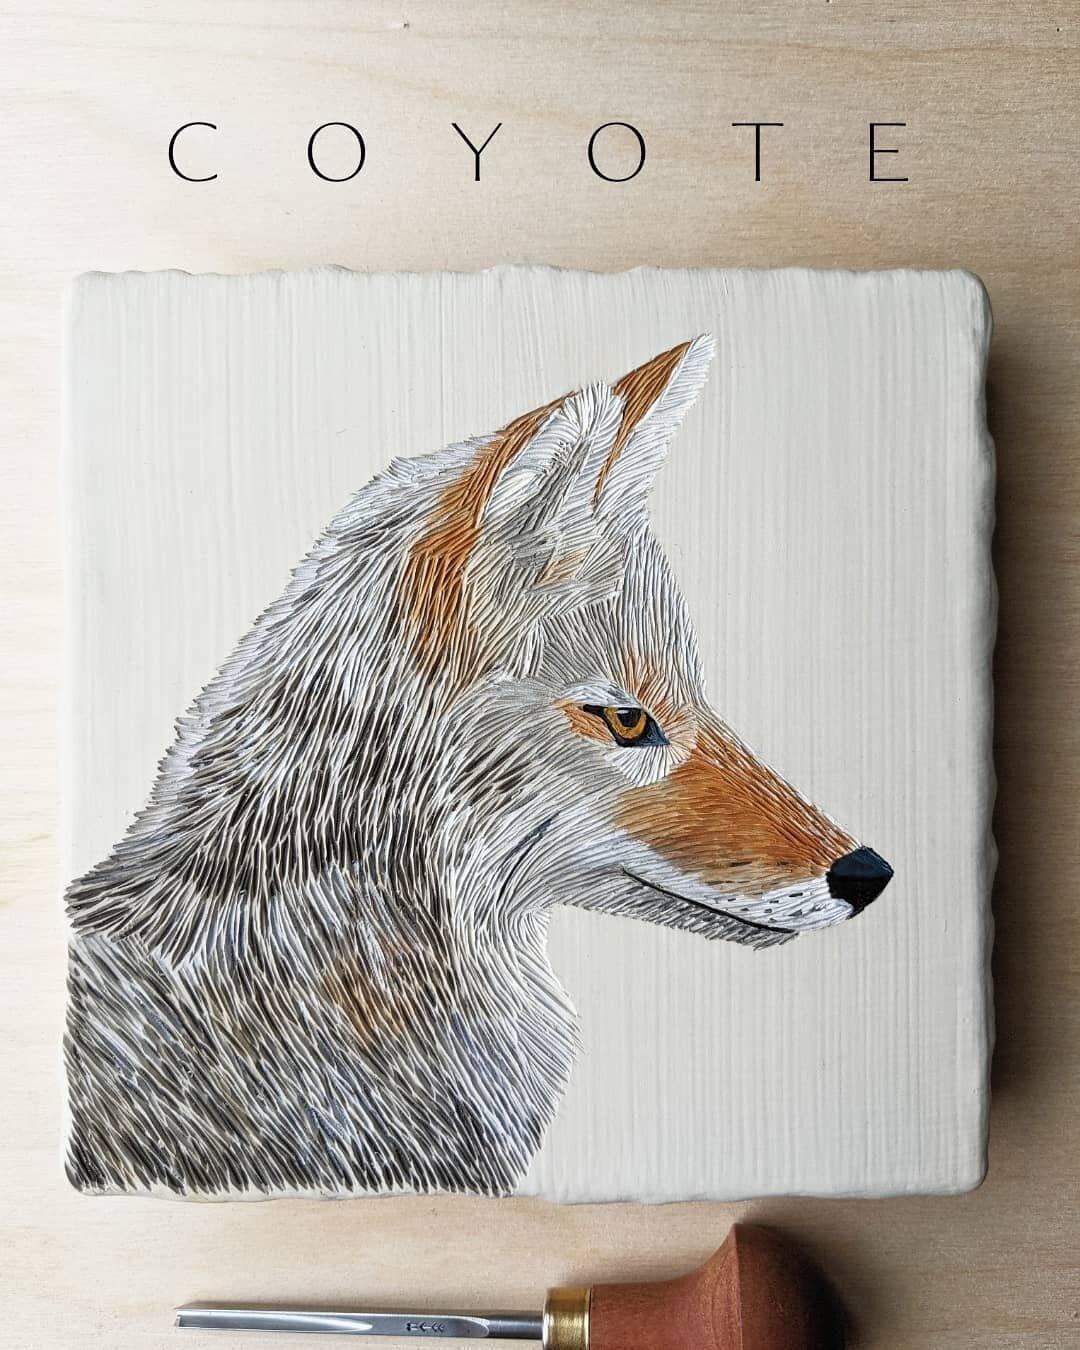 I am really proud of this artwork and relieved that I love this coyote as much as I do.

It was one of those projects that I felt was ugly until it came together at the end. 

I love this coyote and so far it's been the most difficult and rewarding c